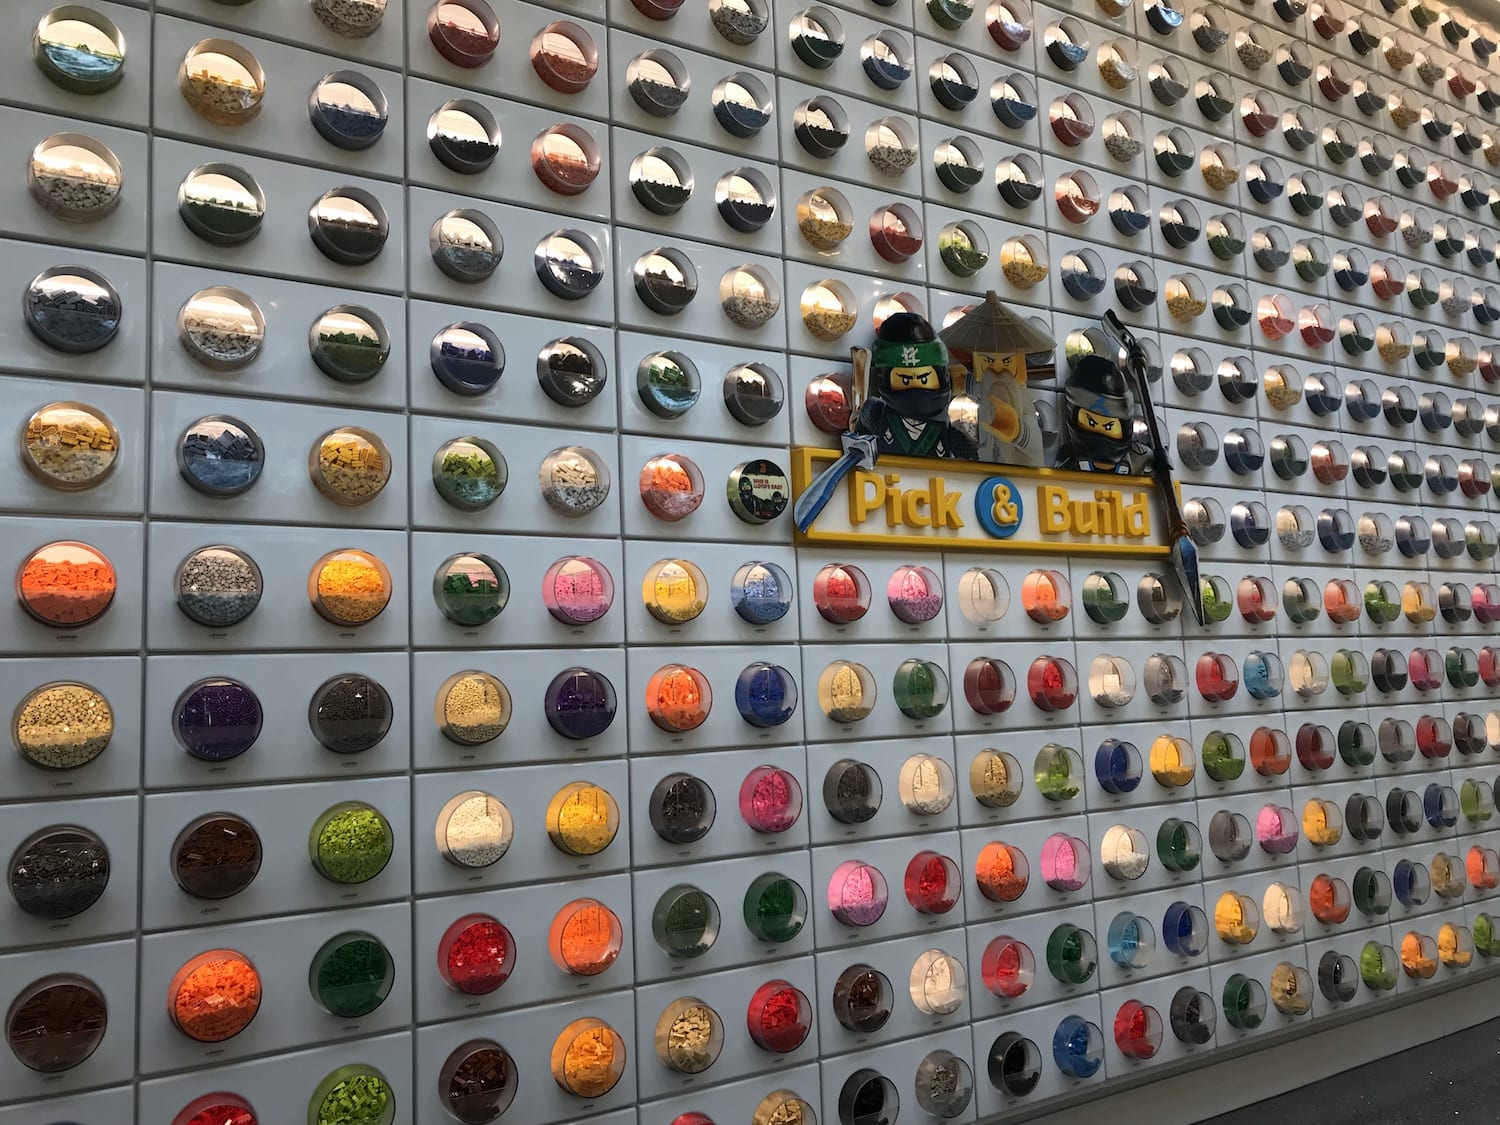 LEGO Store Mall of America Pick & Build Wall